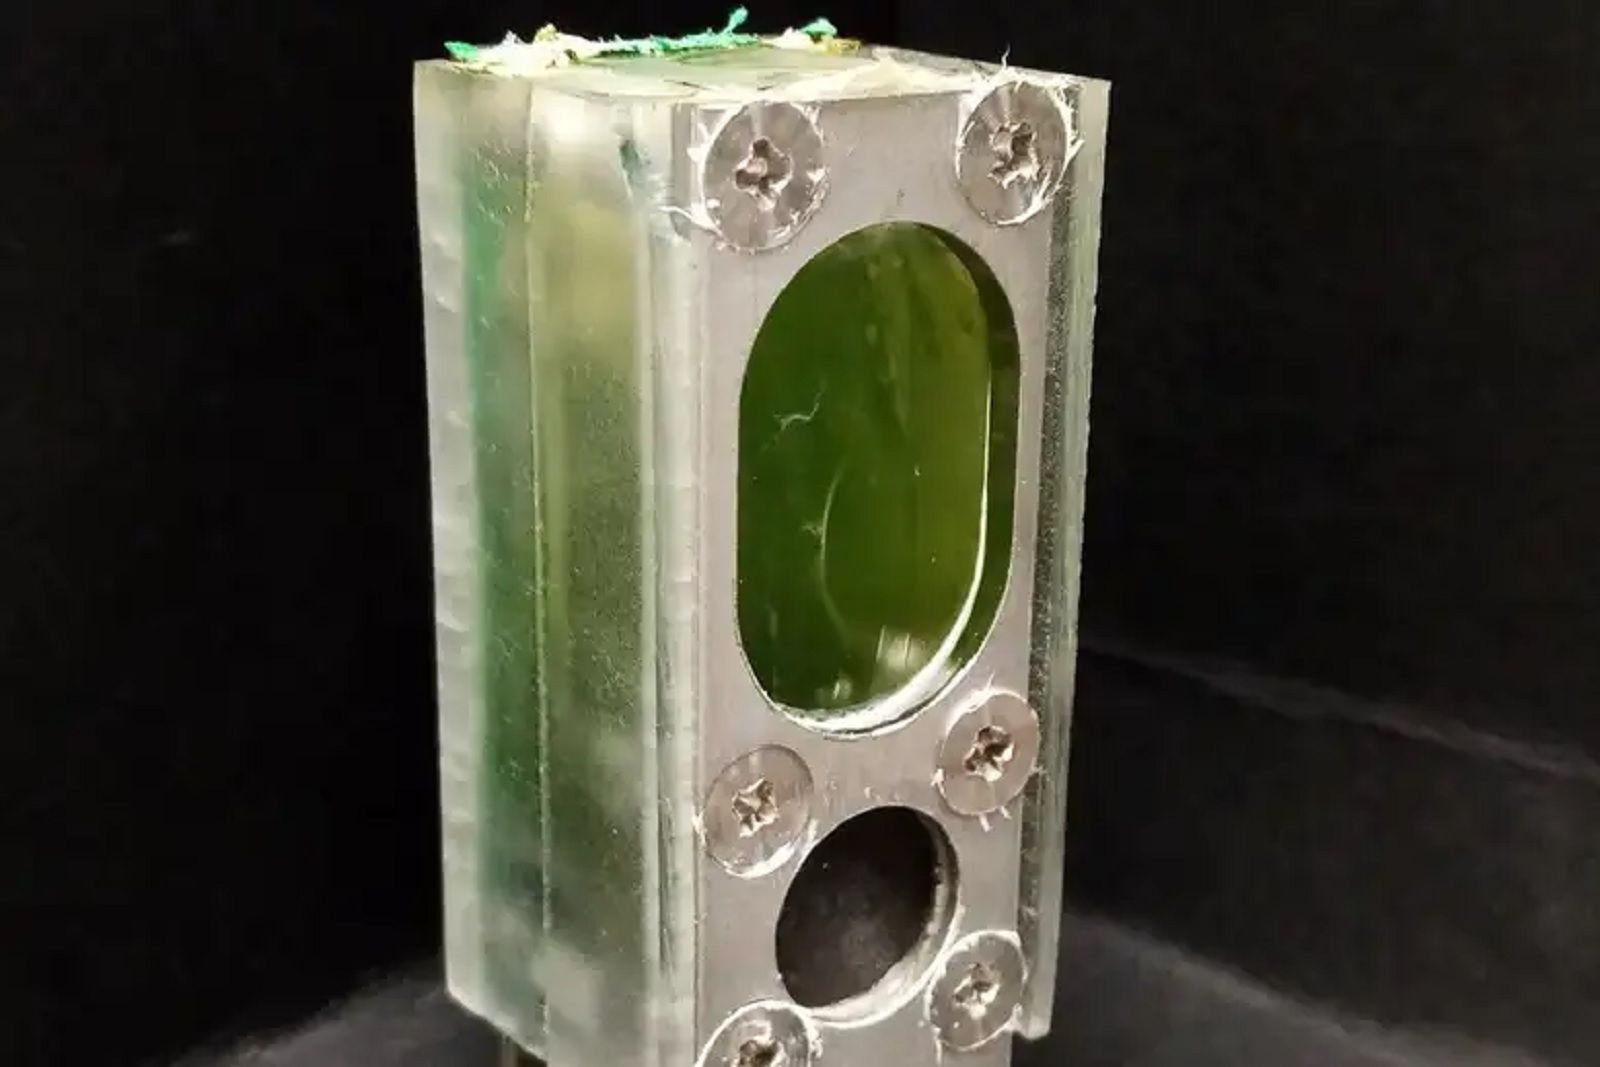 This microcomputer is powered by algae photo 1